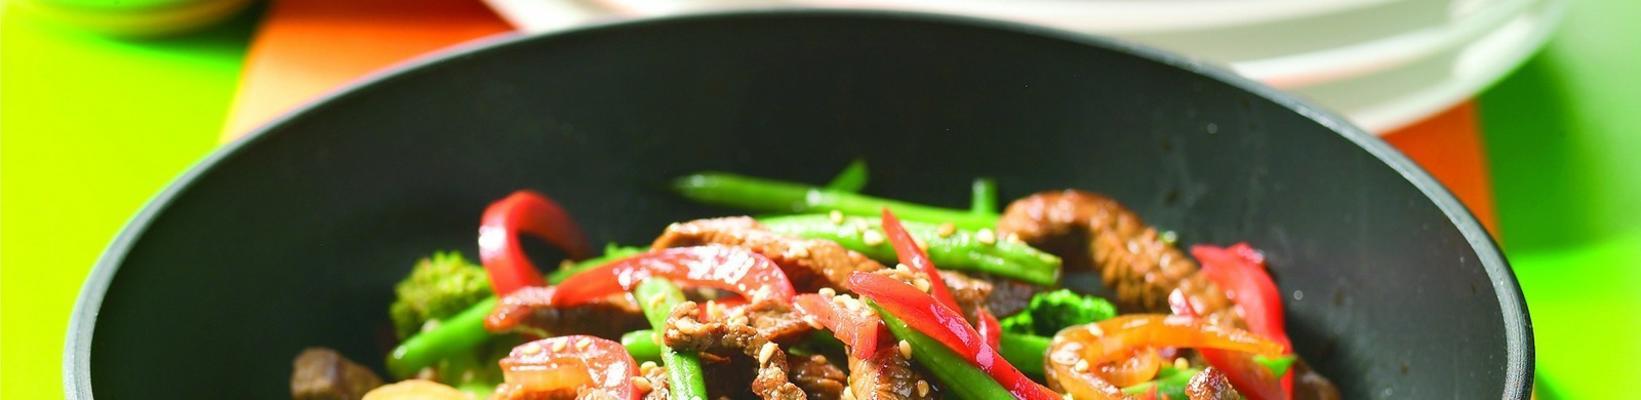 beef strips and vegetables from the wok